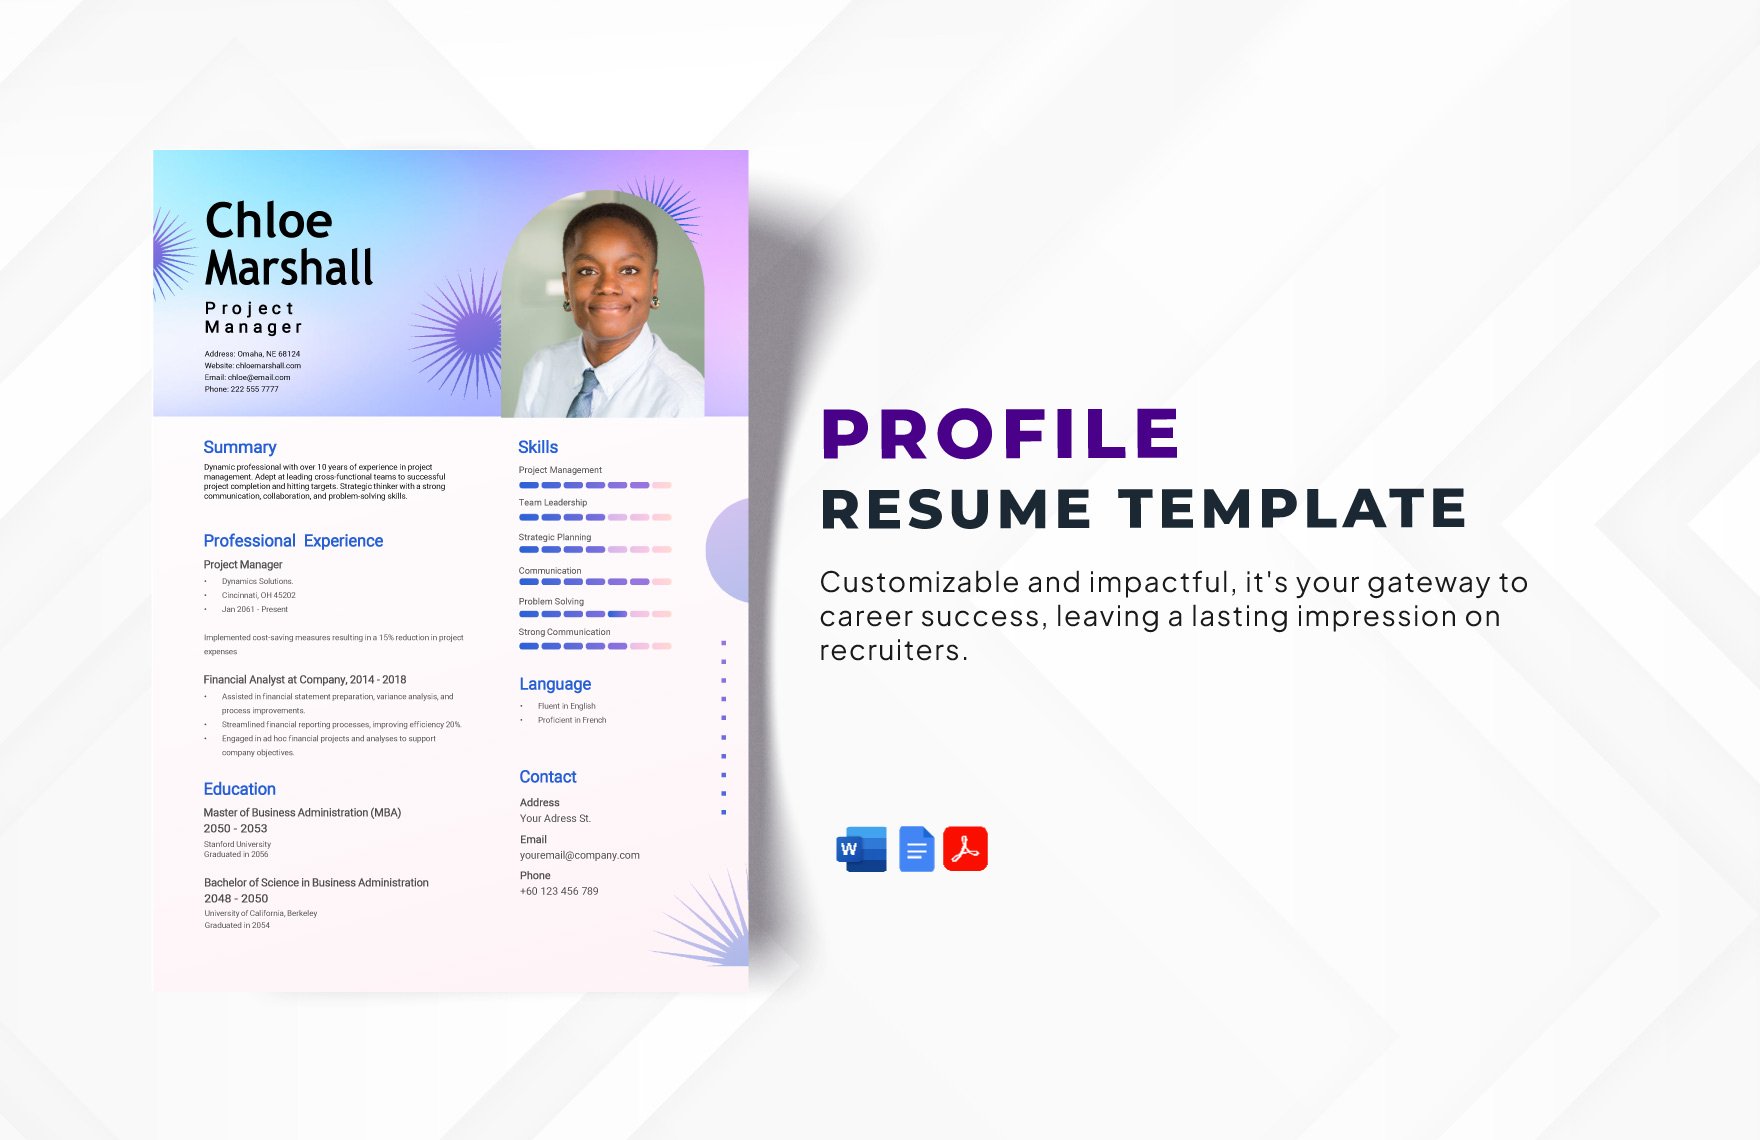 Profile Resume Template in Word, Google Docs, PDF, Apple Pages